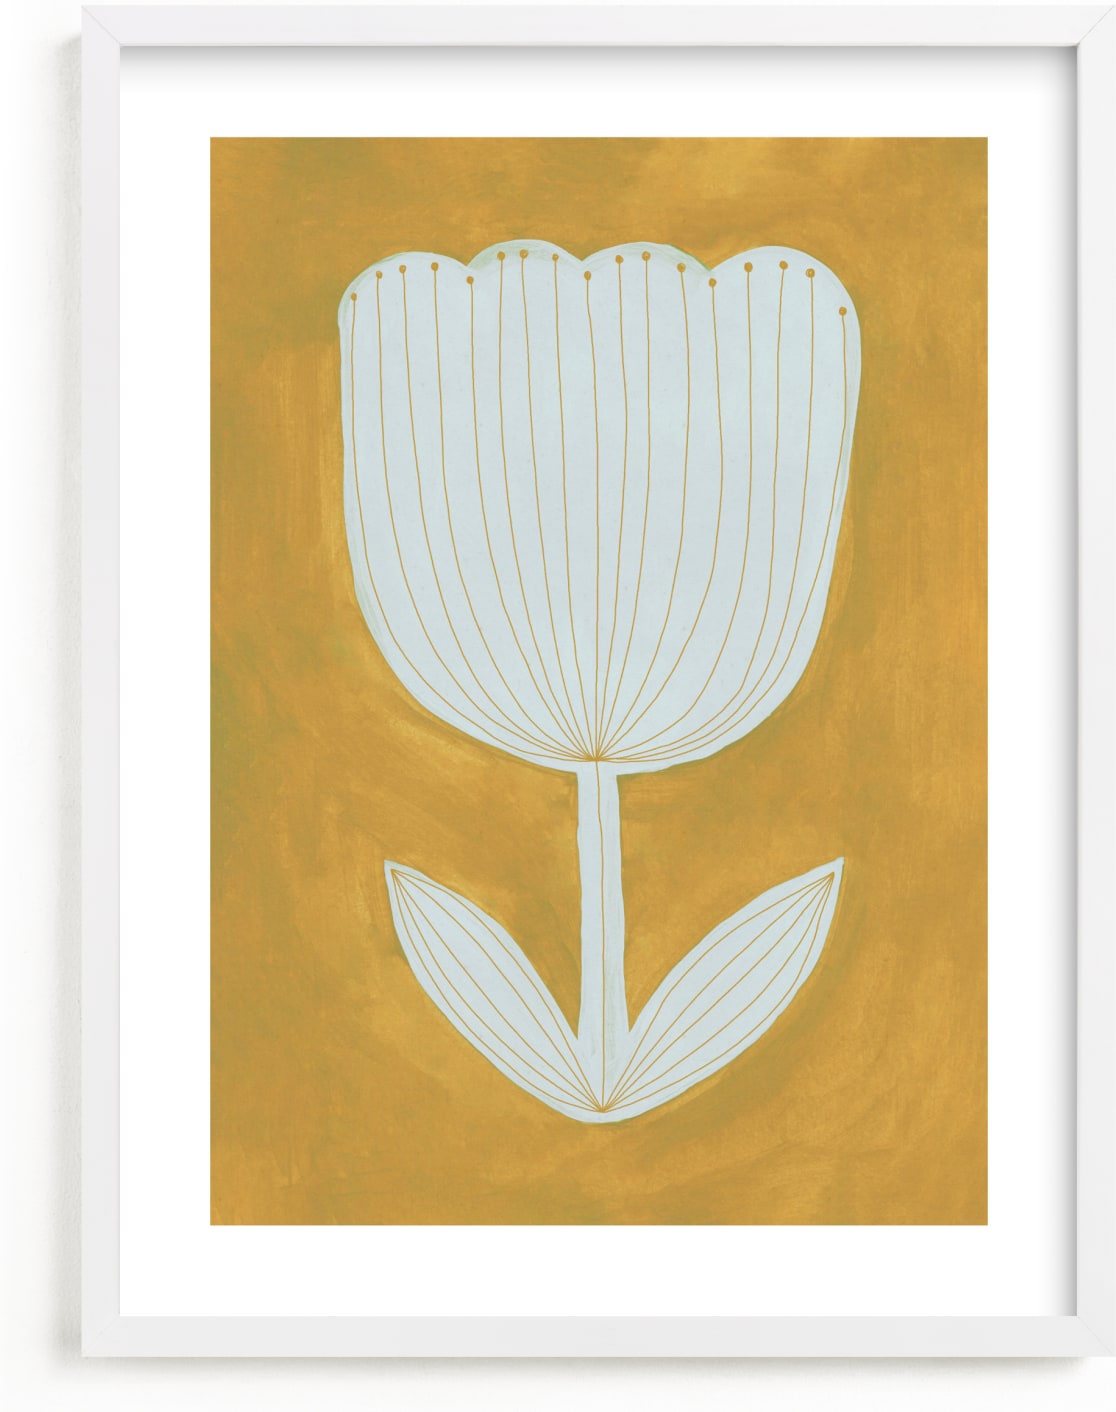 This is a white, yellow art by Alisa Galitsyna called Enchanted Tulip.